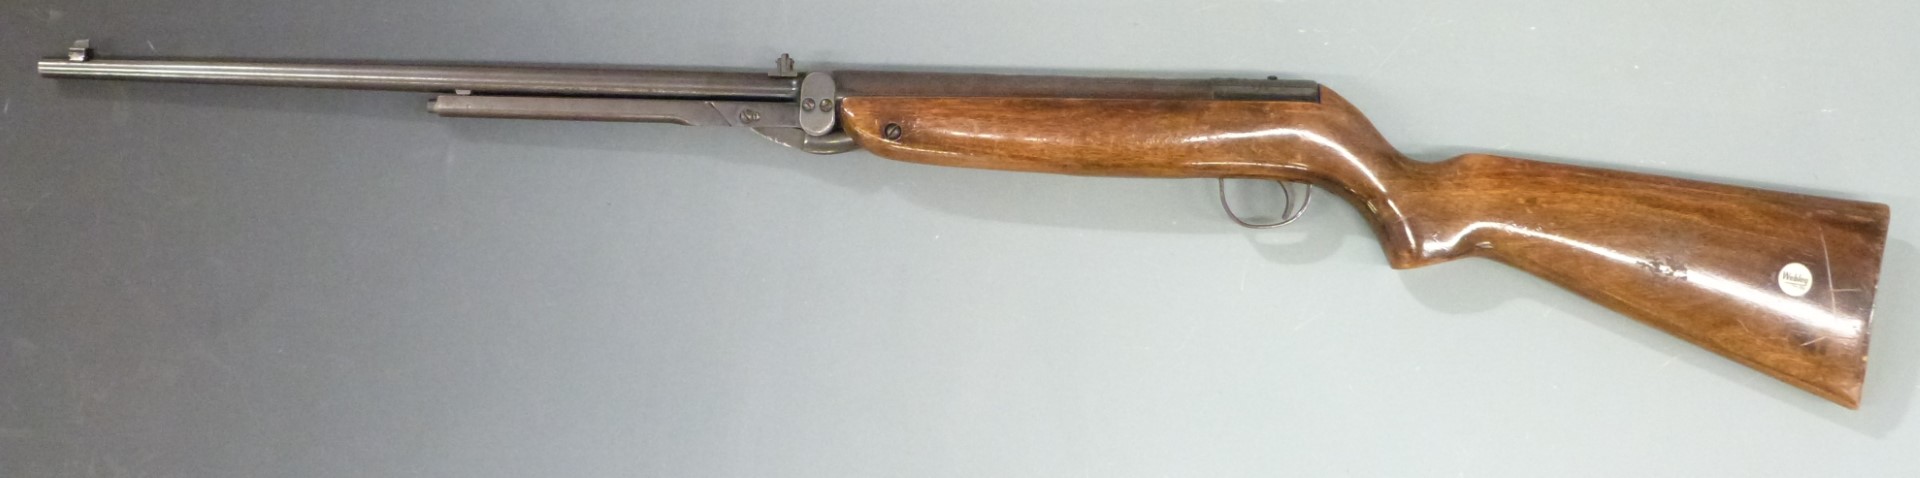 Webley Mark 3 .22 air rifle with semi-pistol grip, named plaque inset to the stock and adjustable - Image 2 of 5